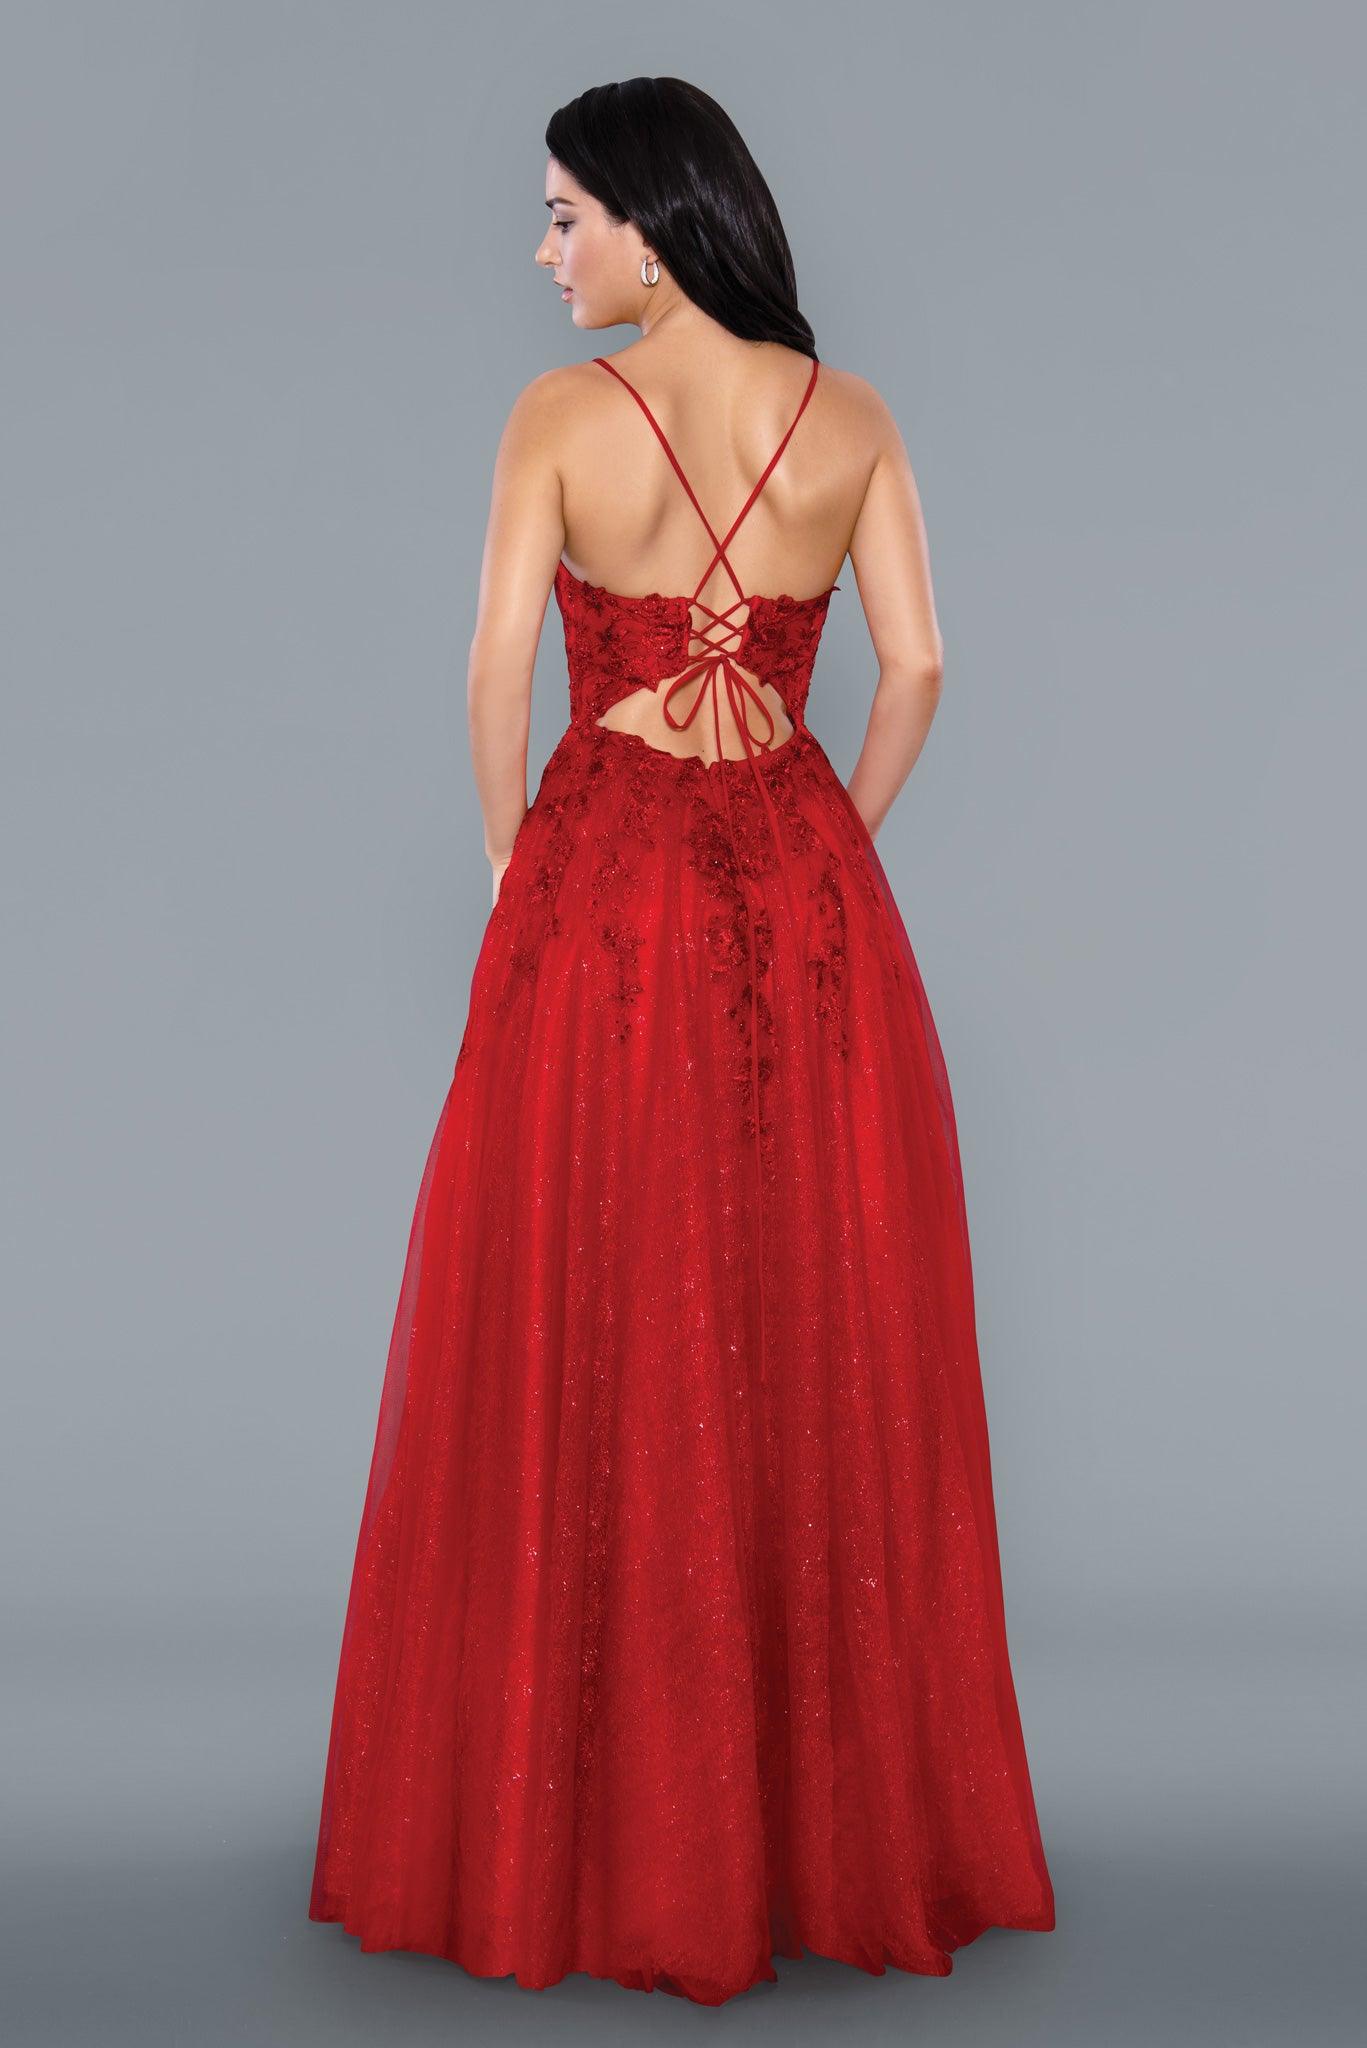 Long Spaghetti Straps Evening Gown Red